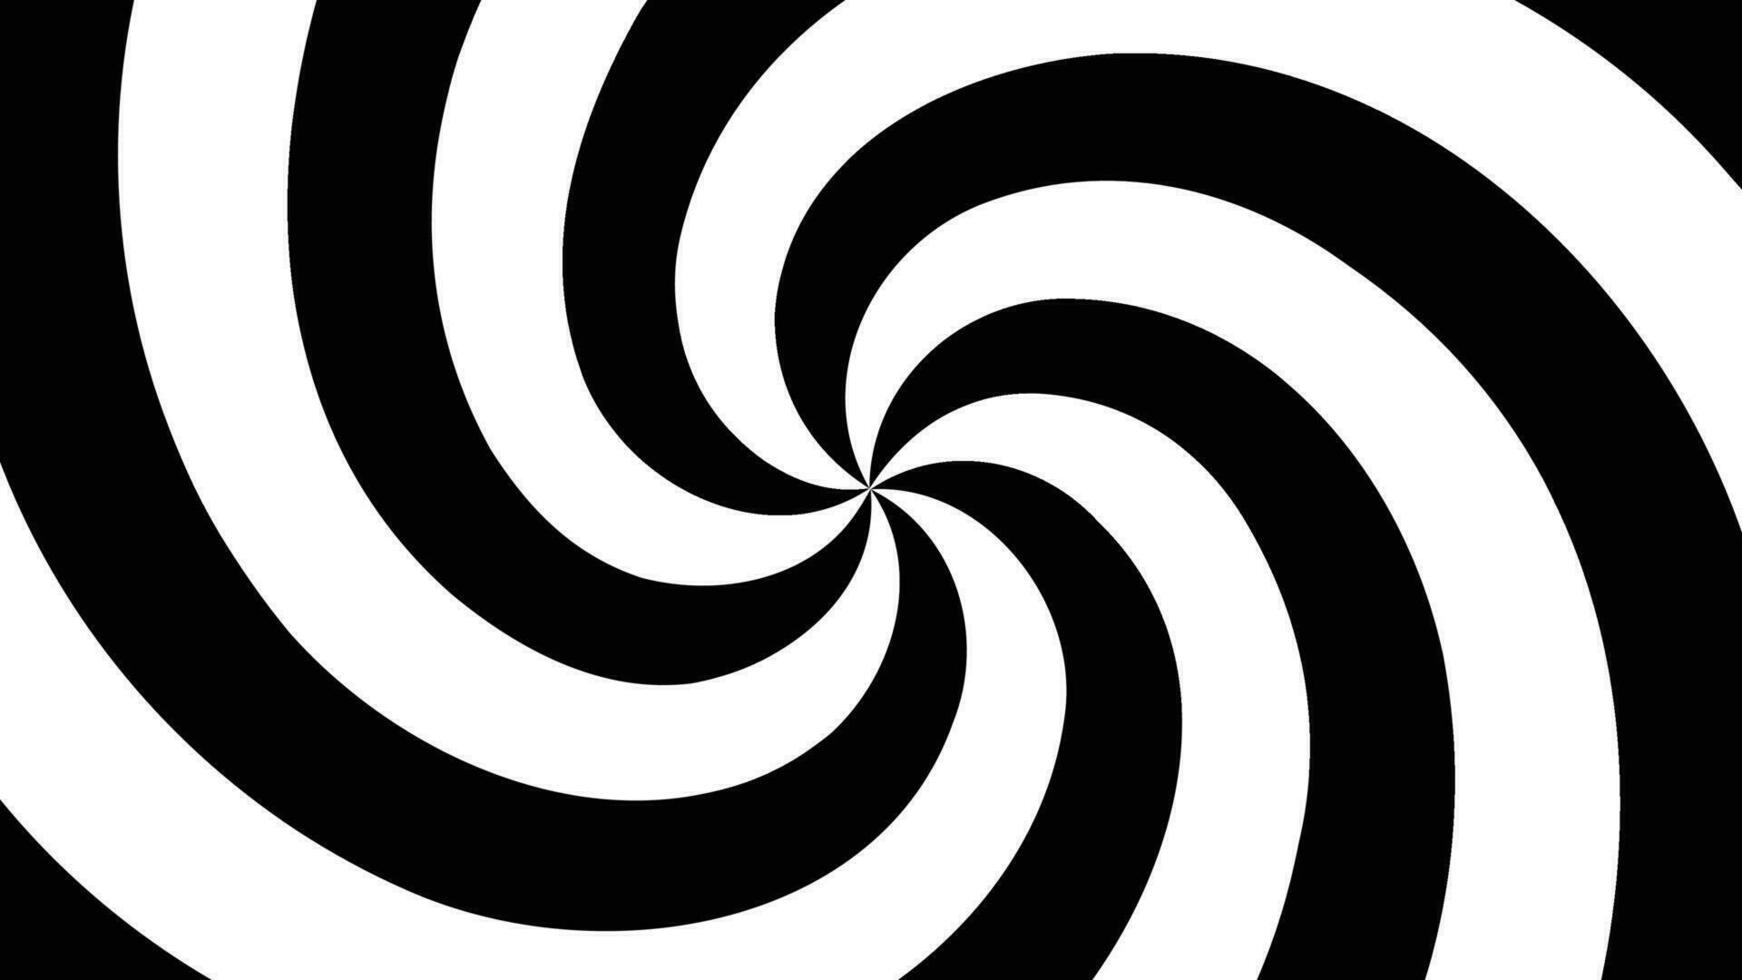 confusing hypnotize black and white swirl spiral background vector